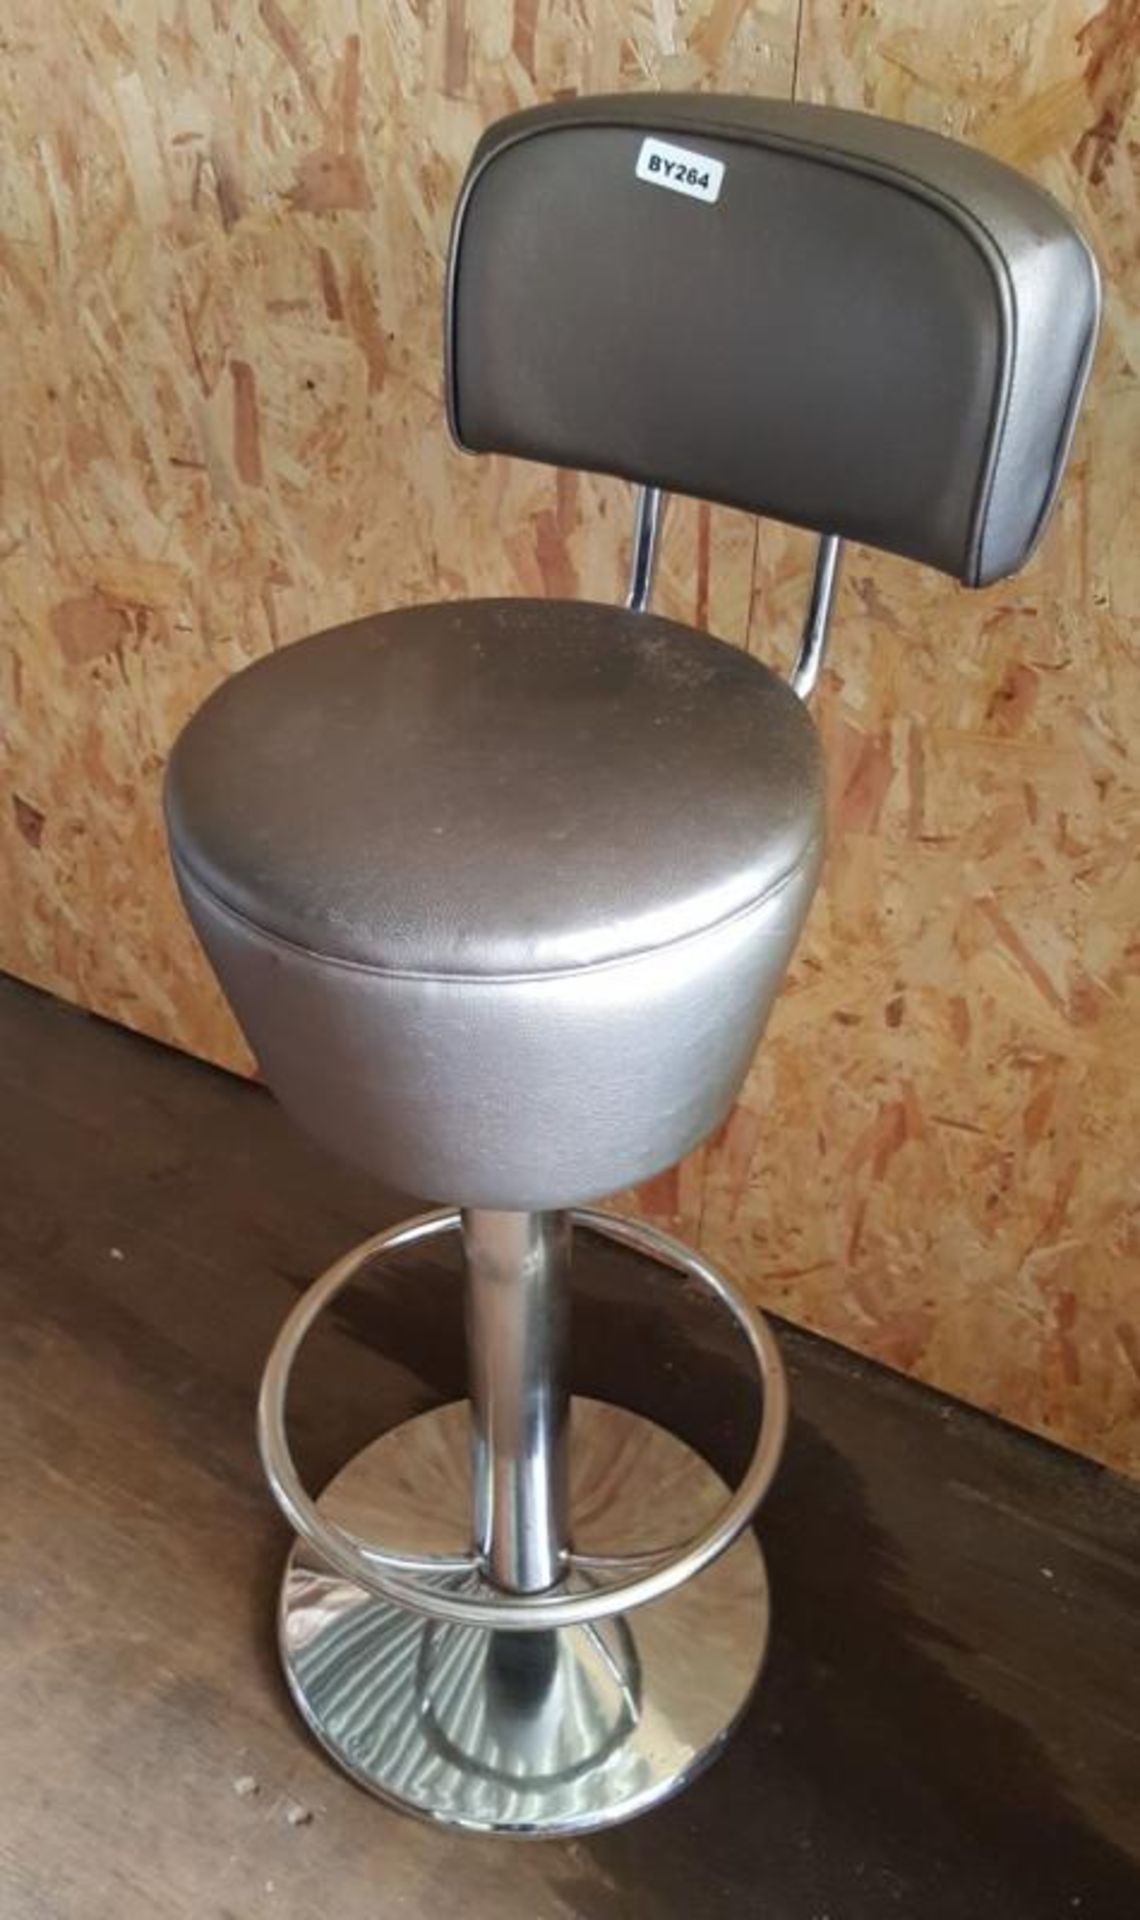 A Set Of 3 Bespoke Chrome Based Bar Stools With Dark Sliver Faux Leather Seat &amp; Back - Ref BY264 - Image 3 of 5